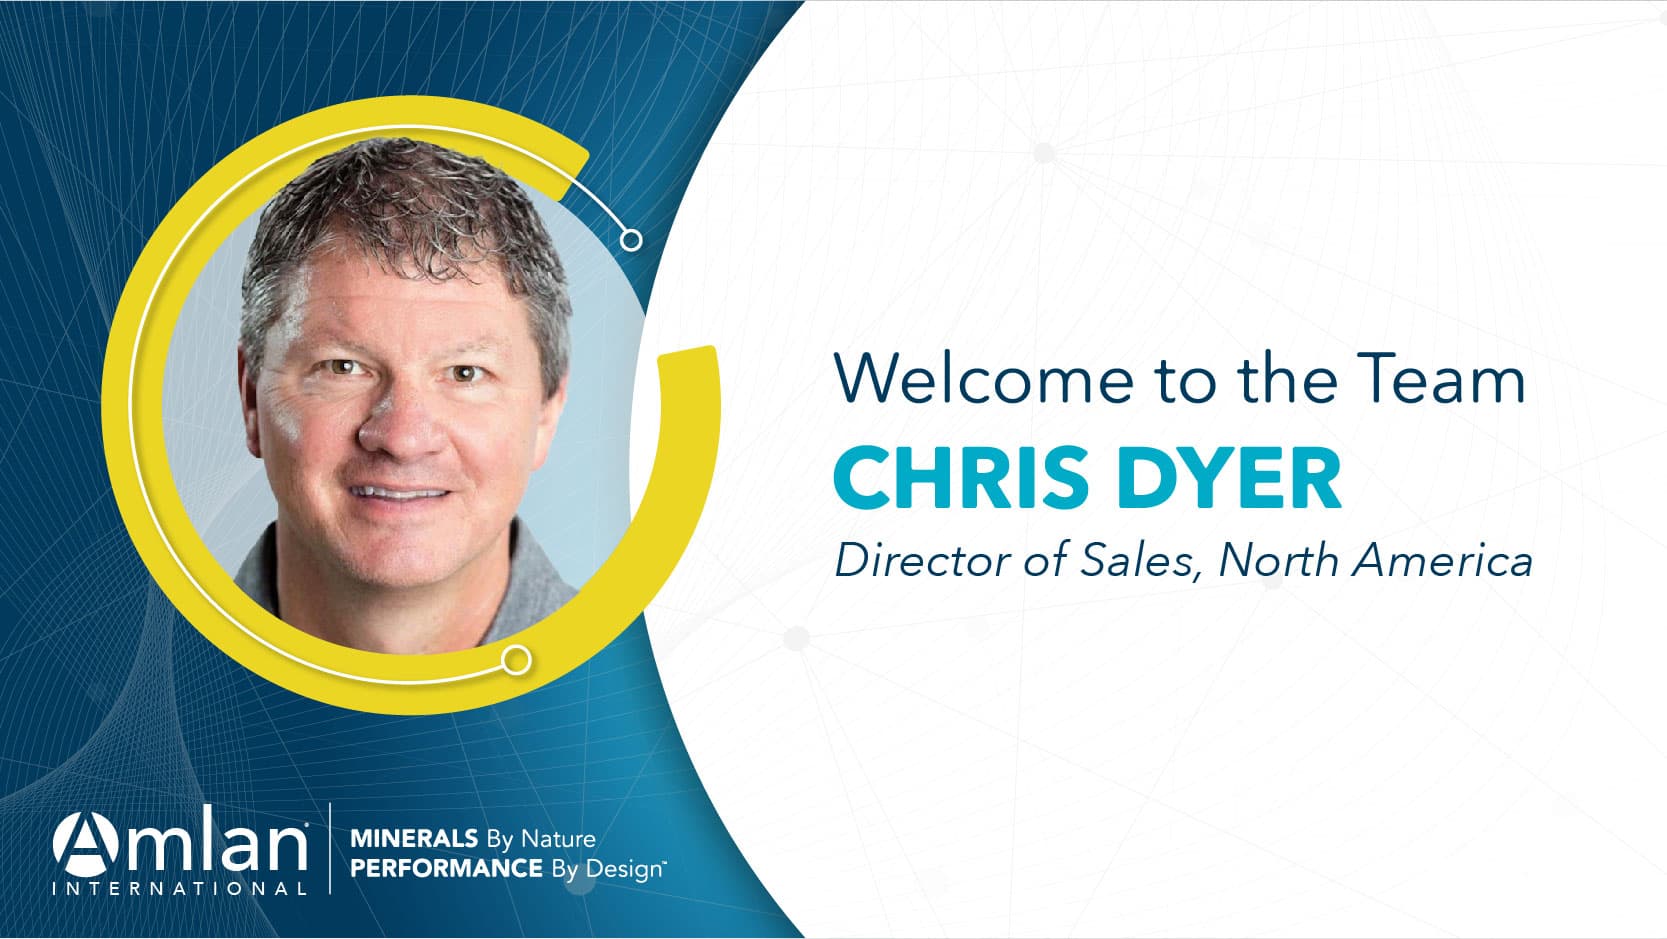 Chris Dyer, Director of Sales, North America.